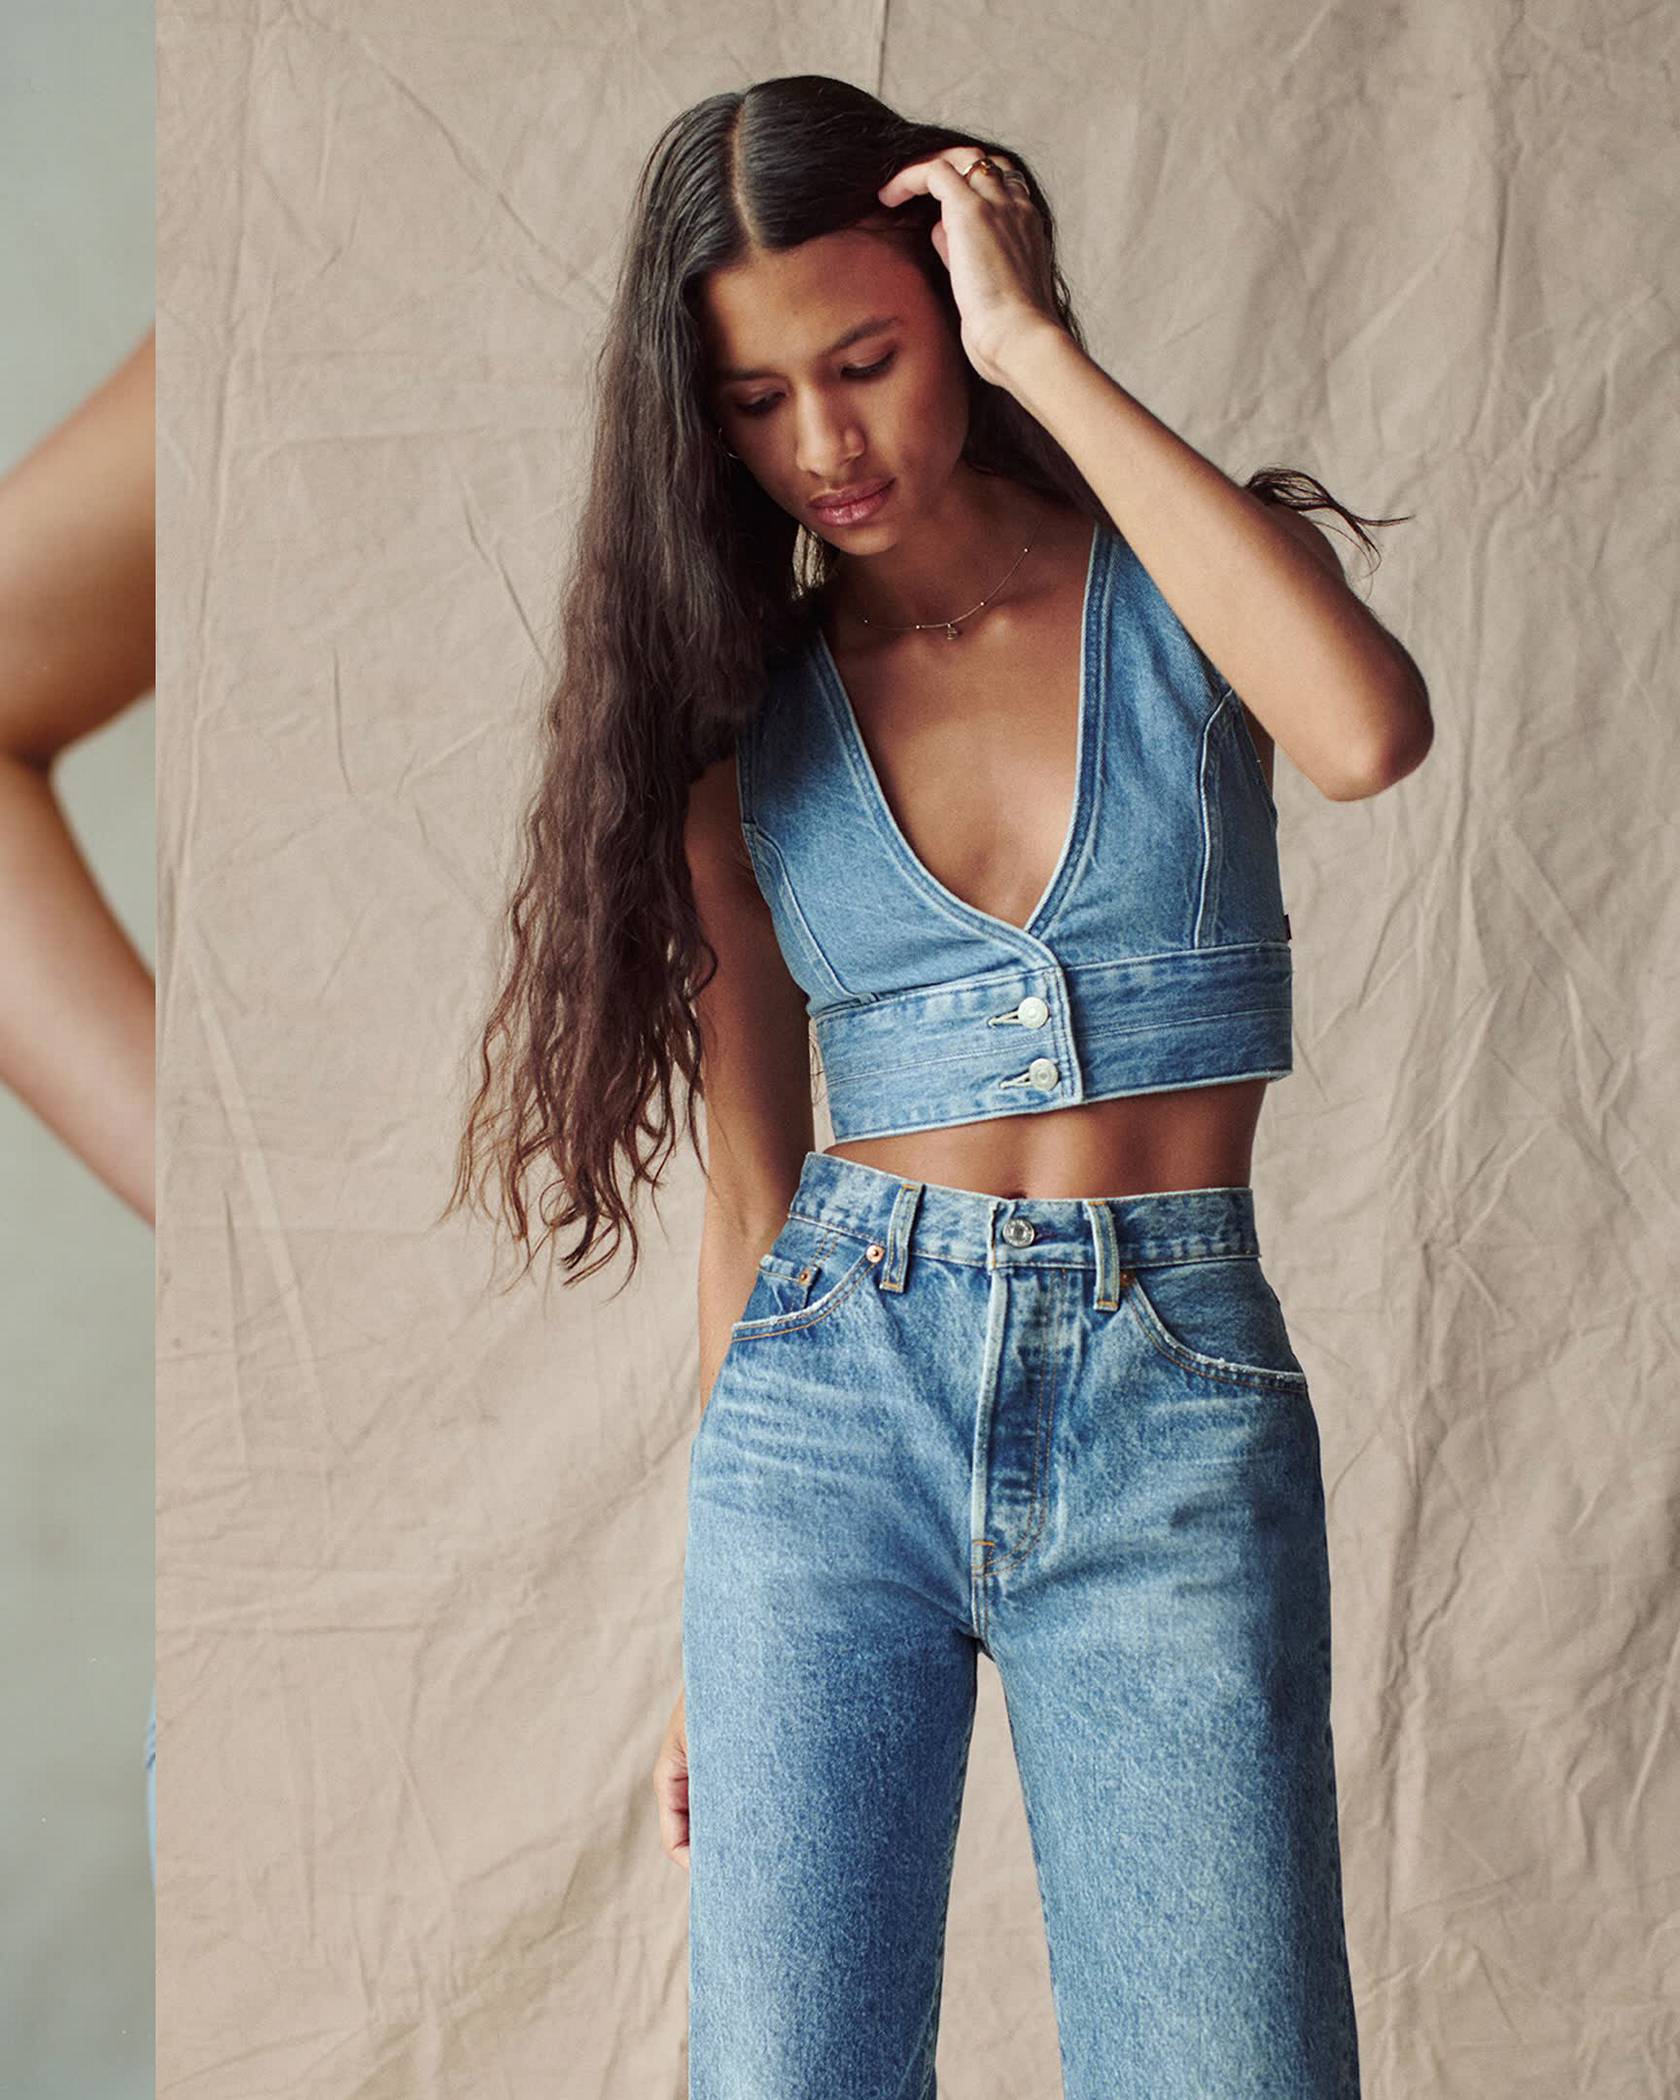 An Ode to Levi's 501s, the Greatest Jeans Of All Time